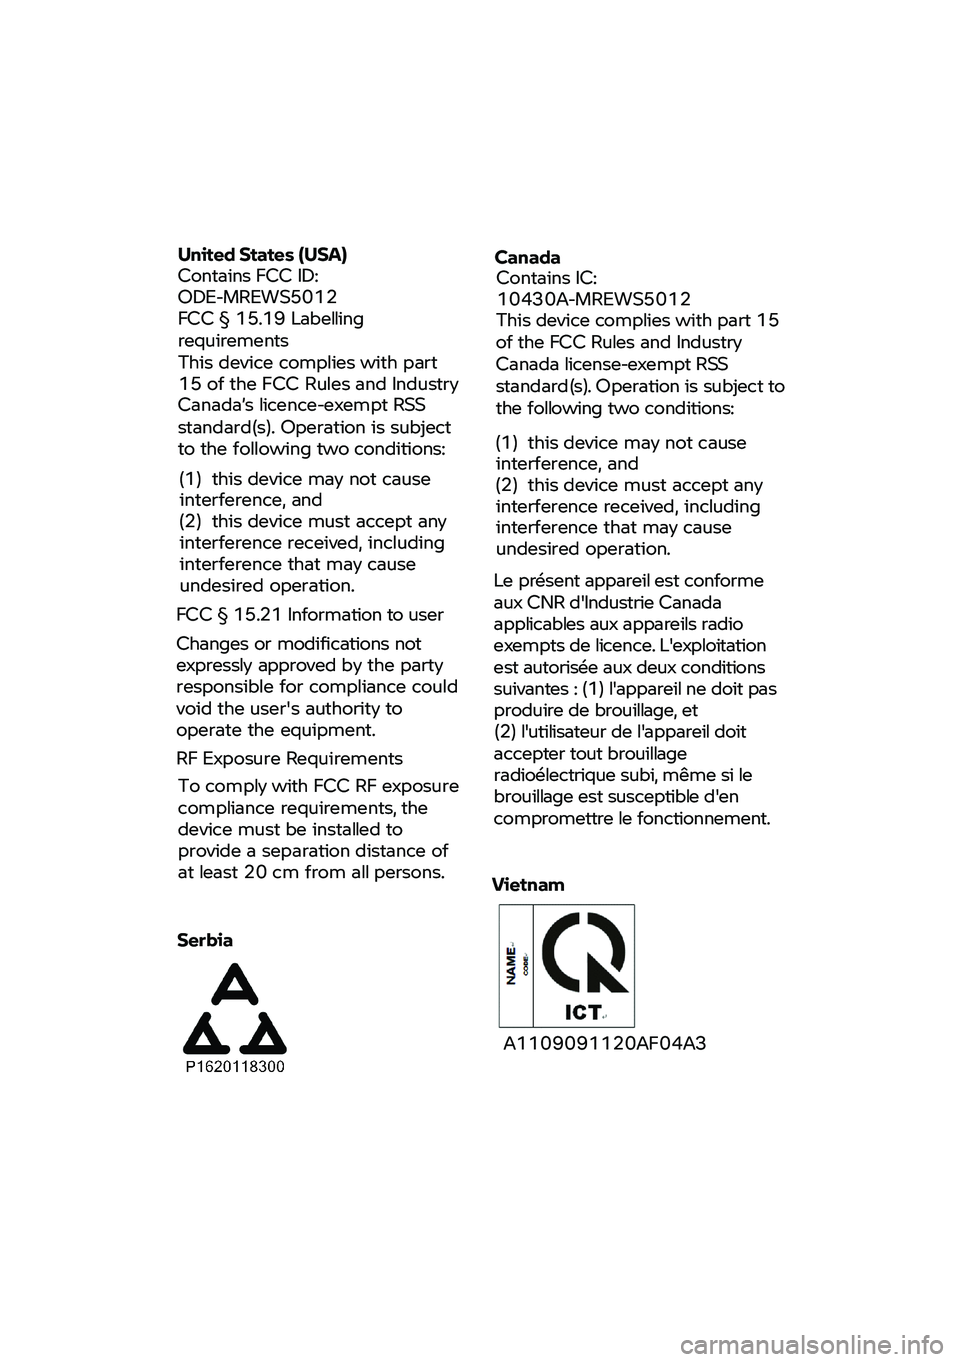 BMW MOTORRAD C 400 GT 2021  Manual do condutor (in Portuguese) United 
States (USA) 
Contains FCC ID:                           
ODE-MREWS5012
FCC  §
 15.19 Labelling 
requirements
This  device  complies  with part 
15  of the  FCC 

Rules and Industry 
Canada�